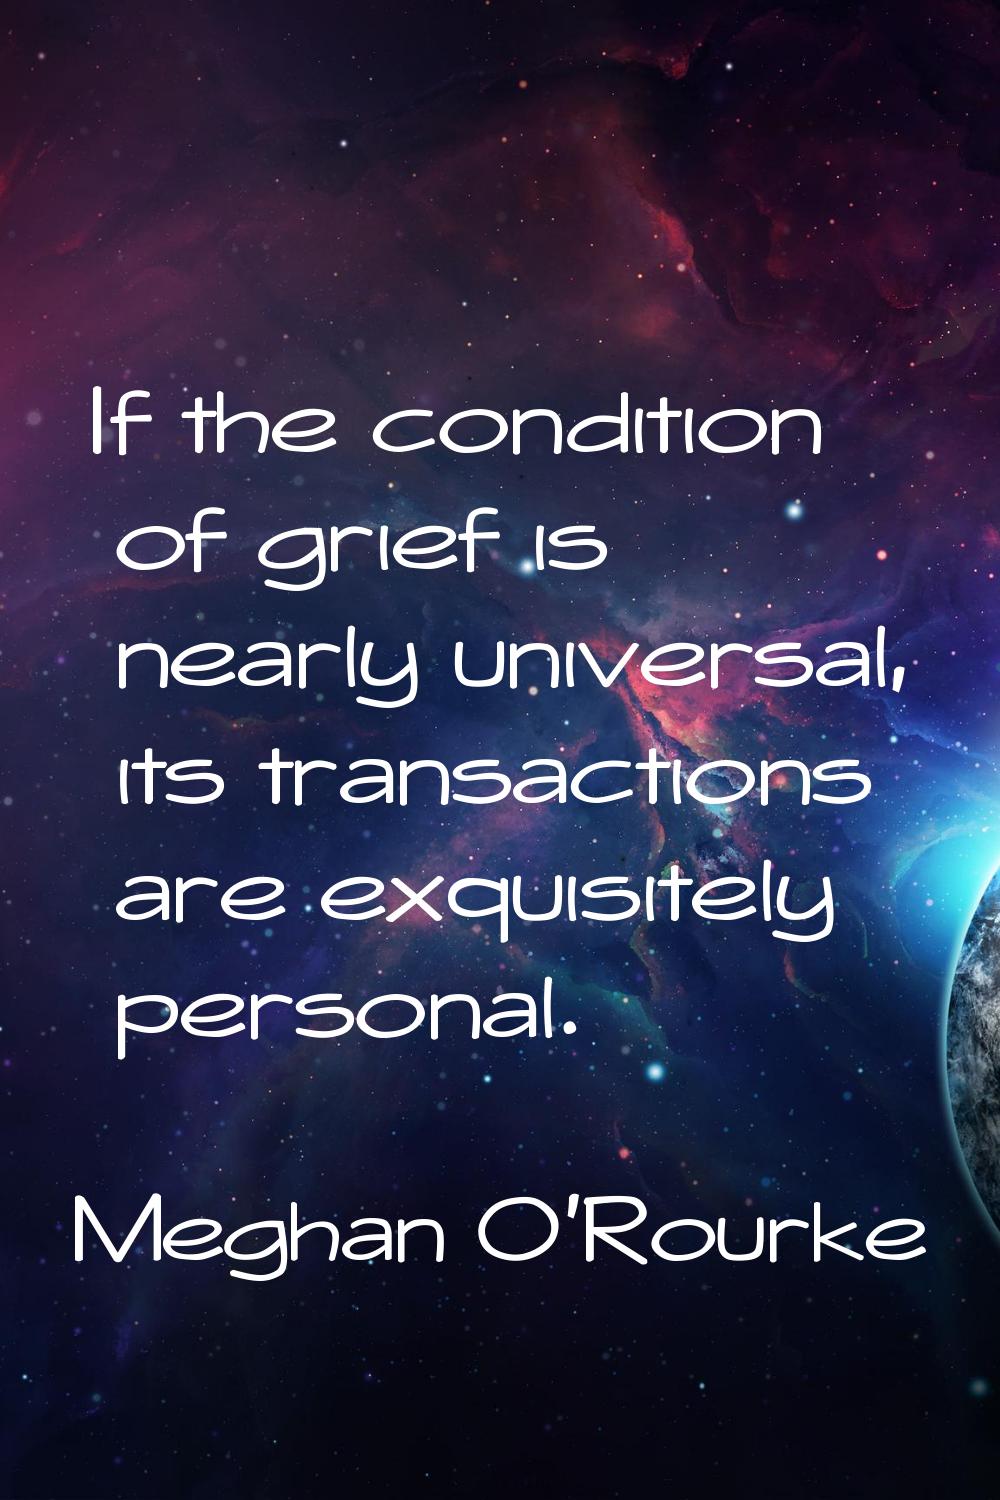 If the condition of grief is nearly universal, its transactions are exquisitely personal.